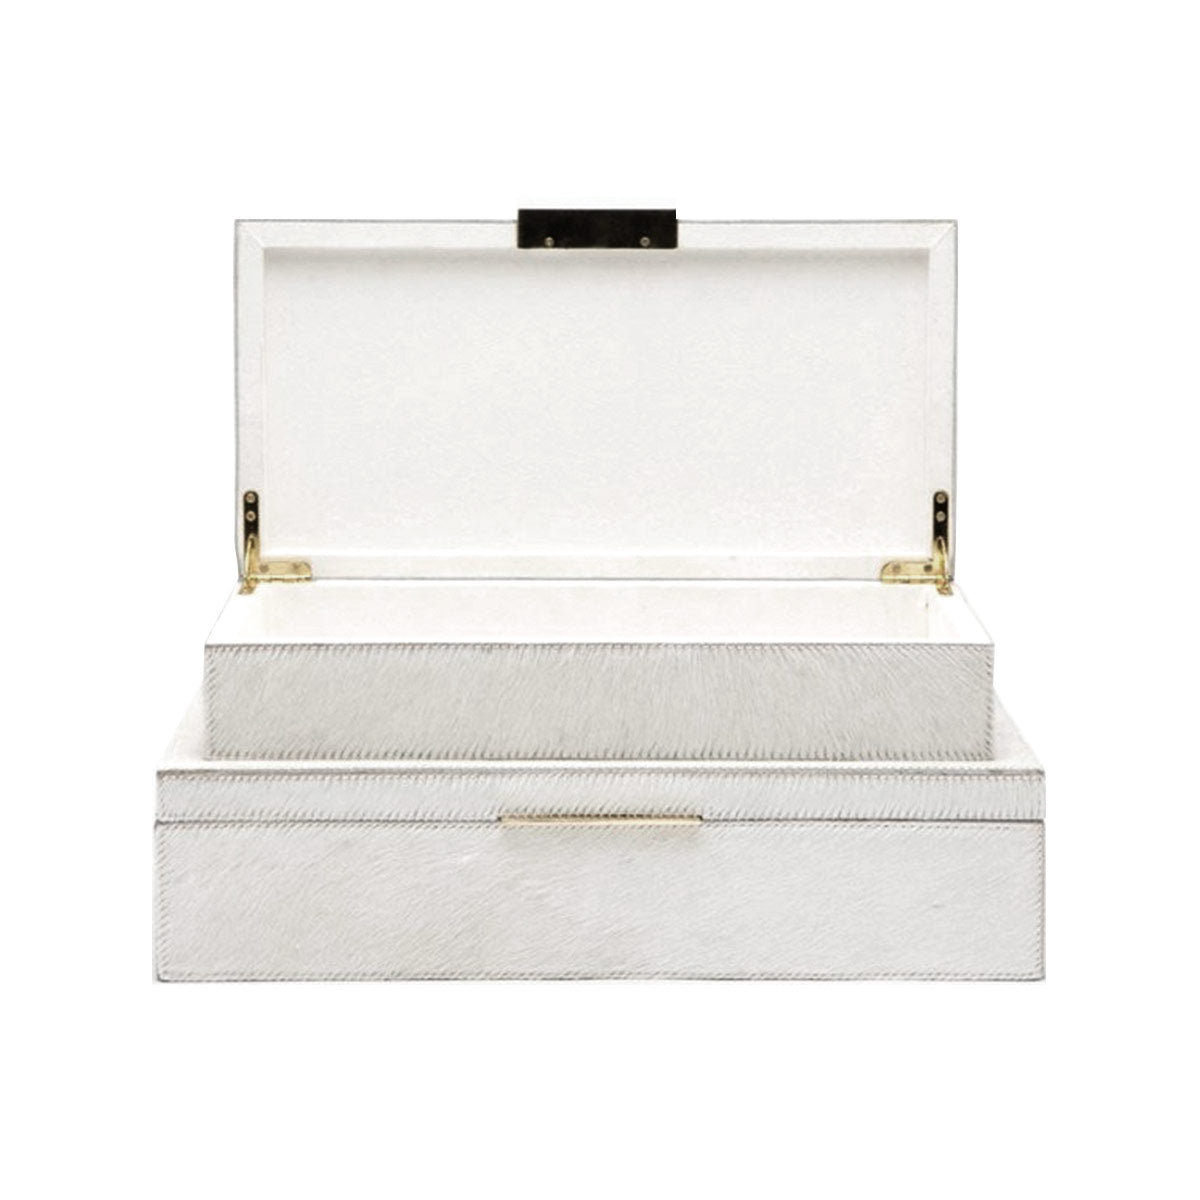 Ralston Hair-On-Hide Box - Jung Lee NY